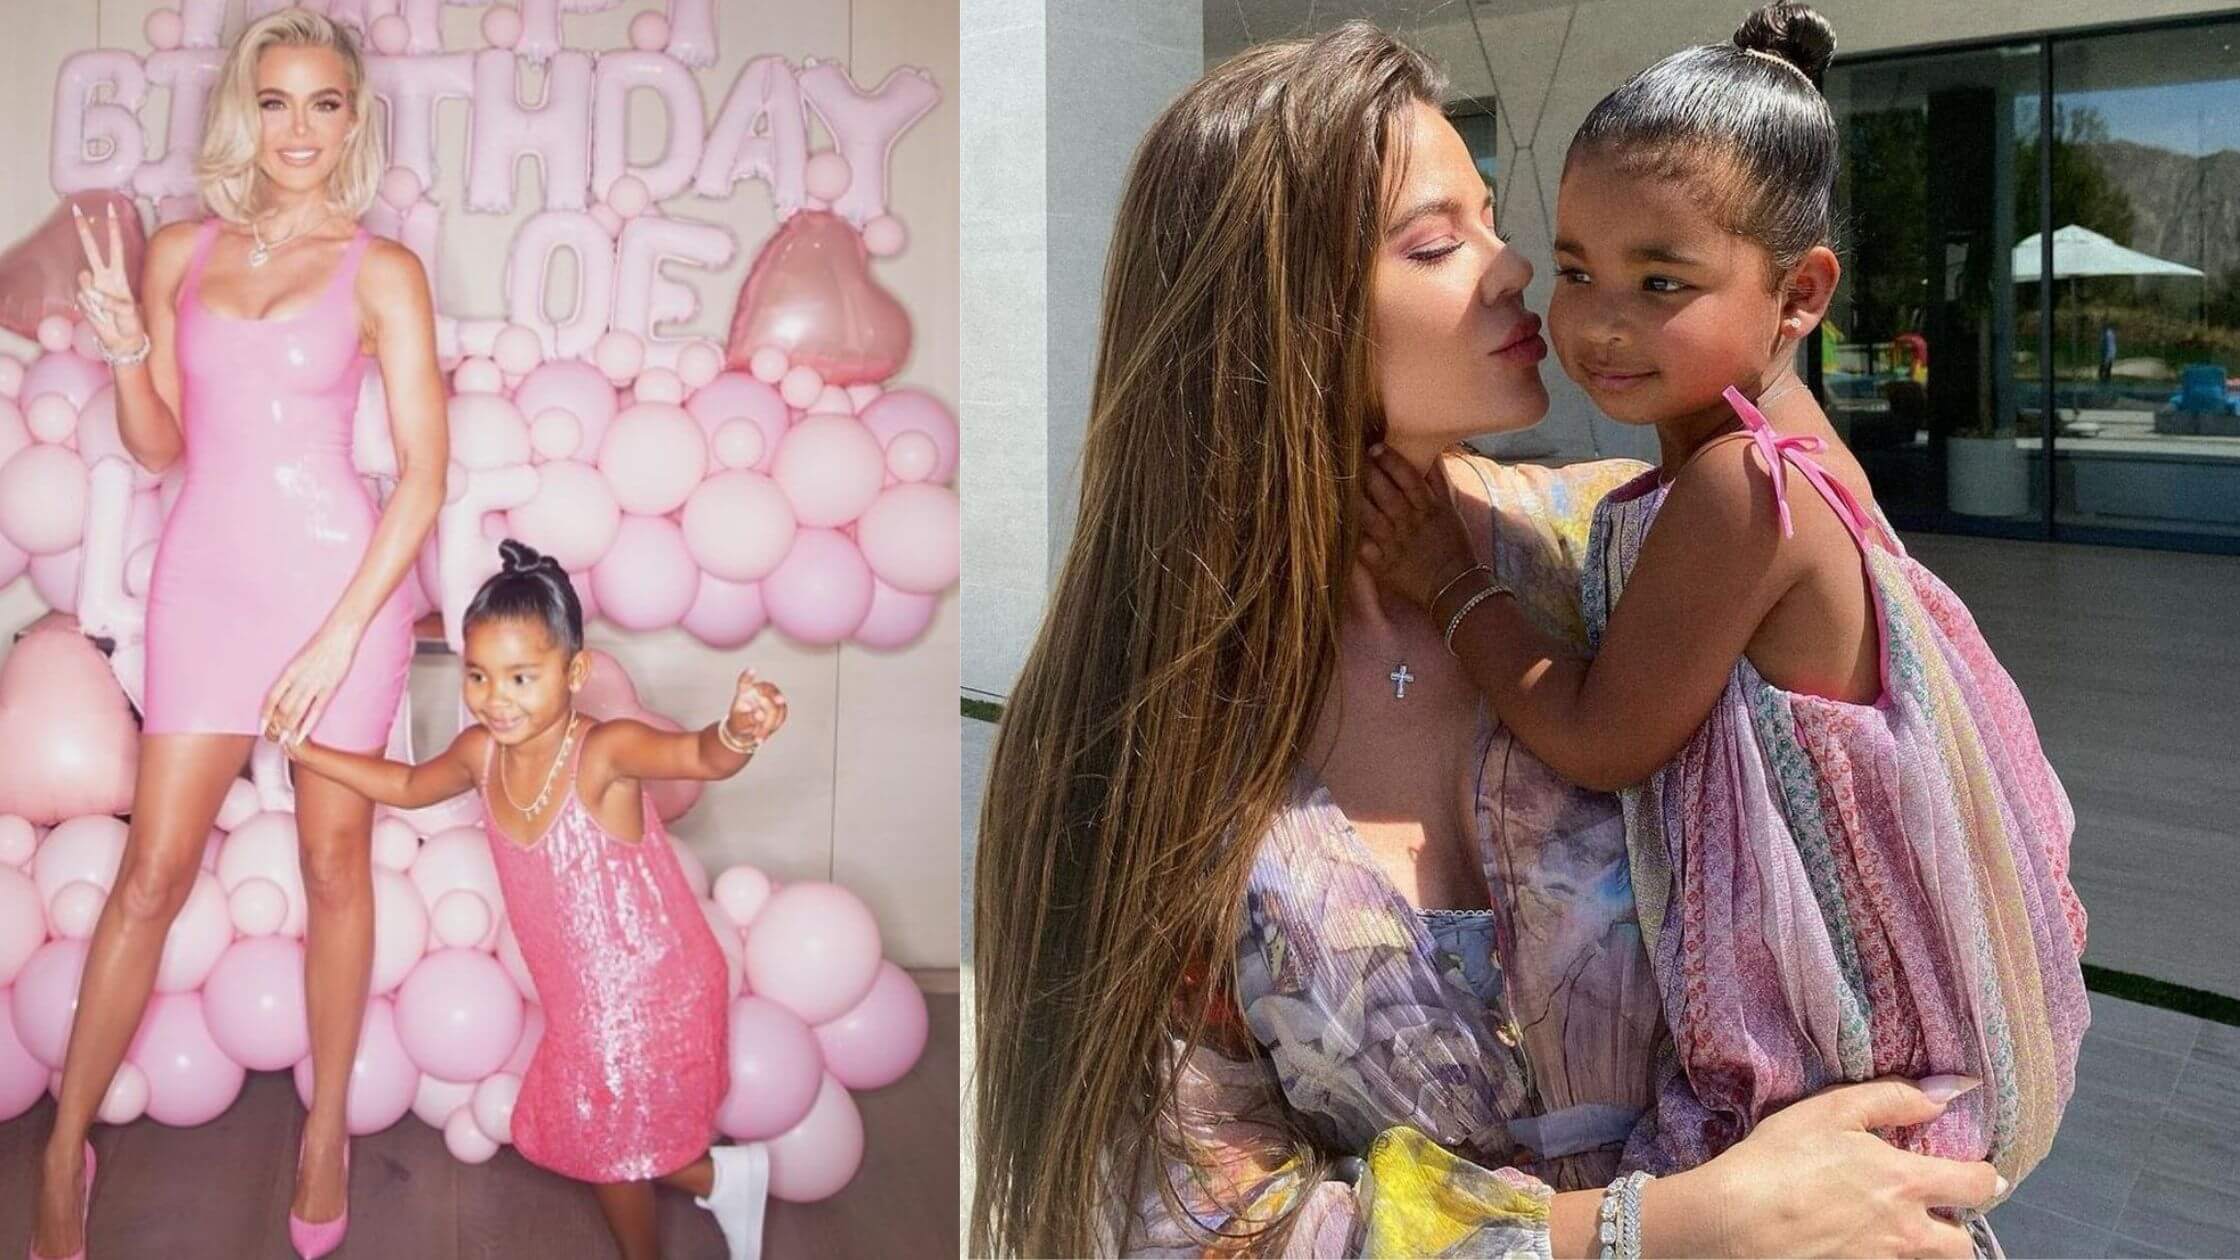 Khloe Kardashian And Her Daughter True Had Matching Pink Dresses At Her 38th Birthday Party